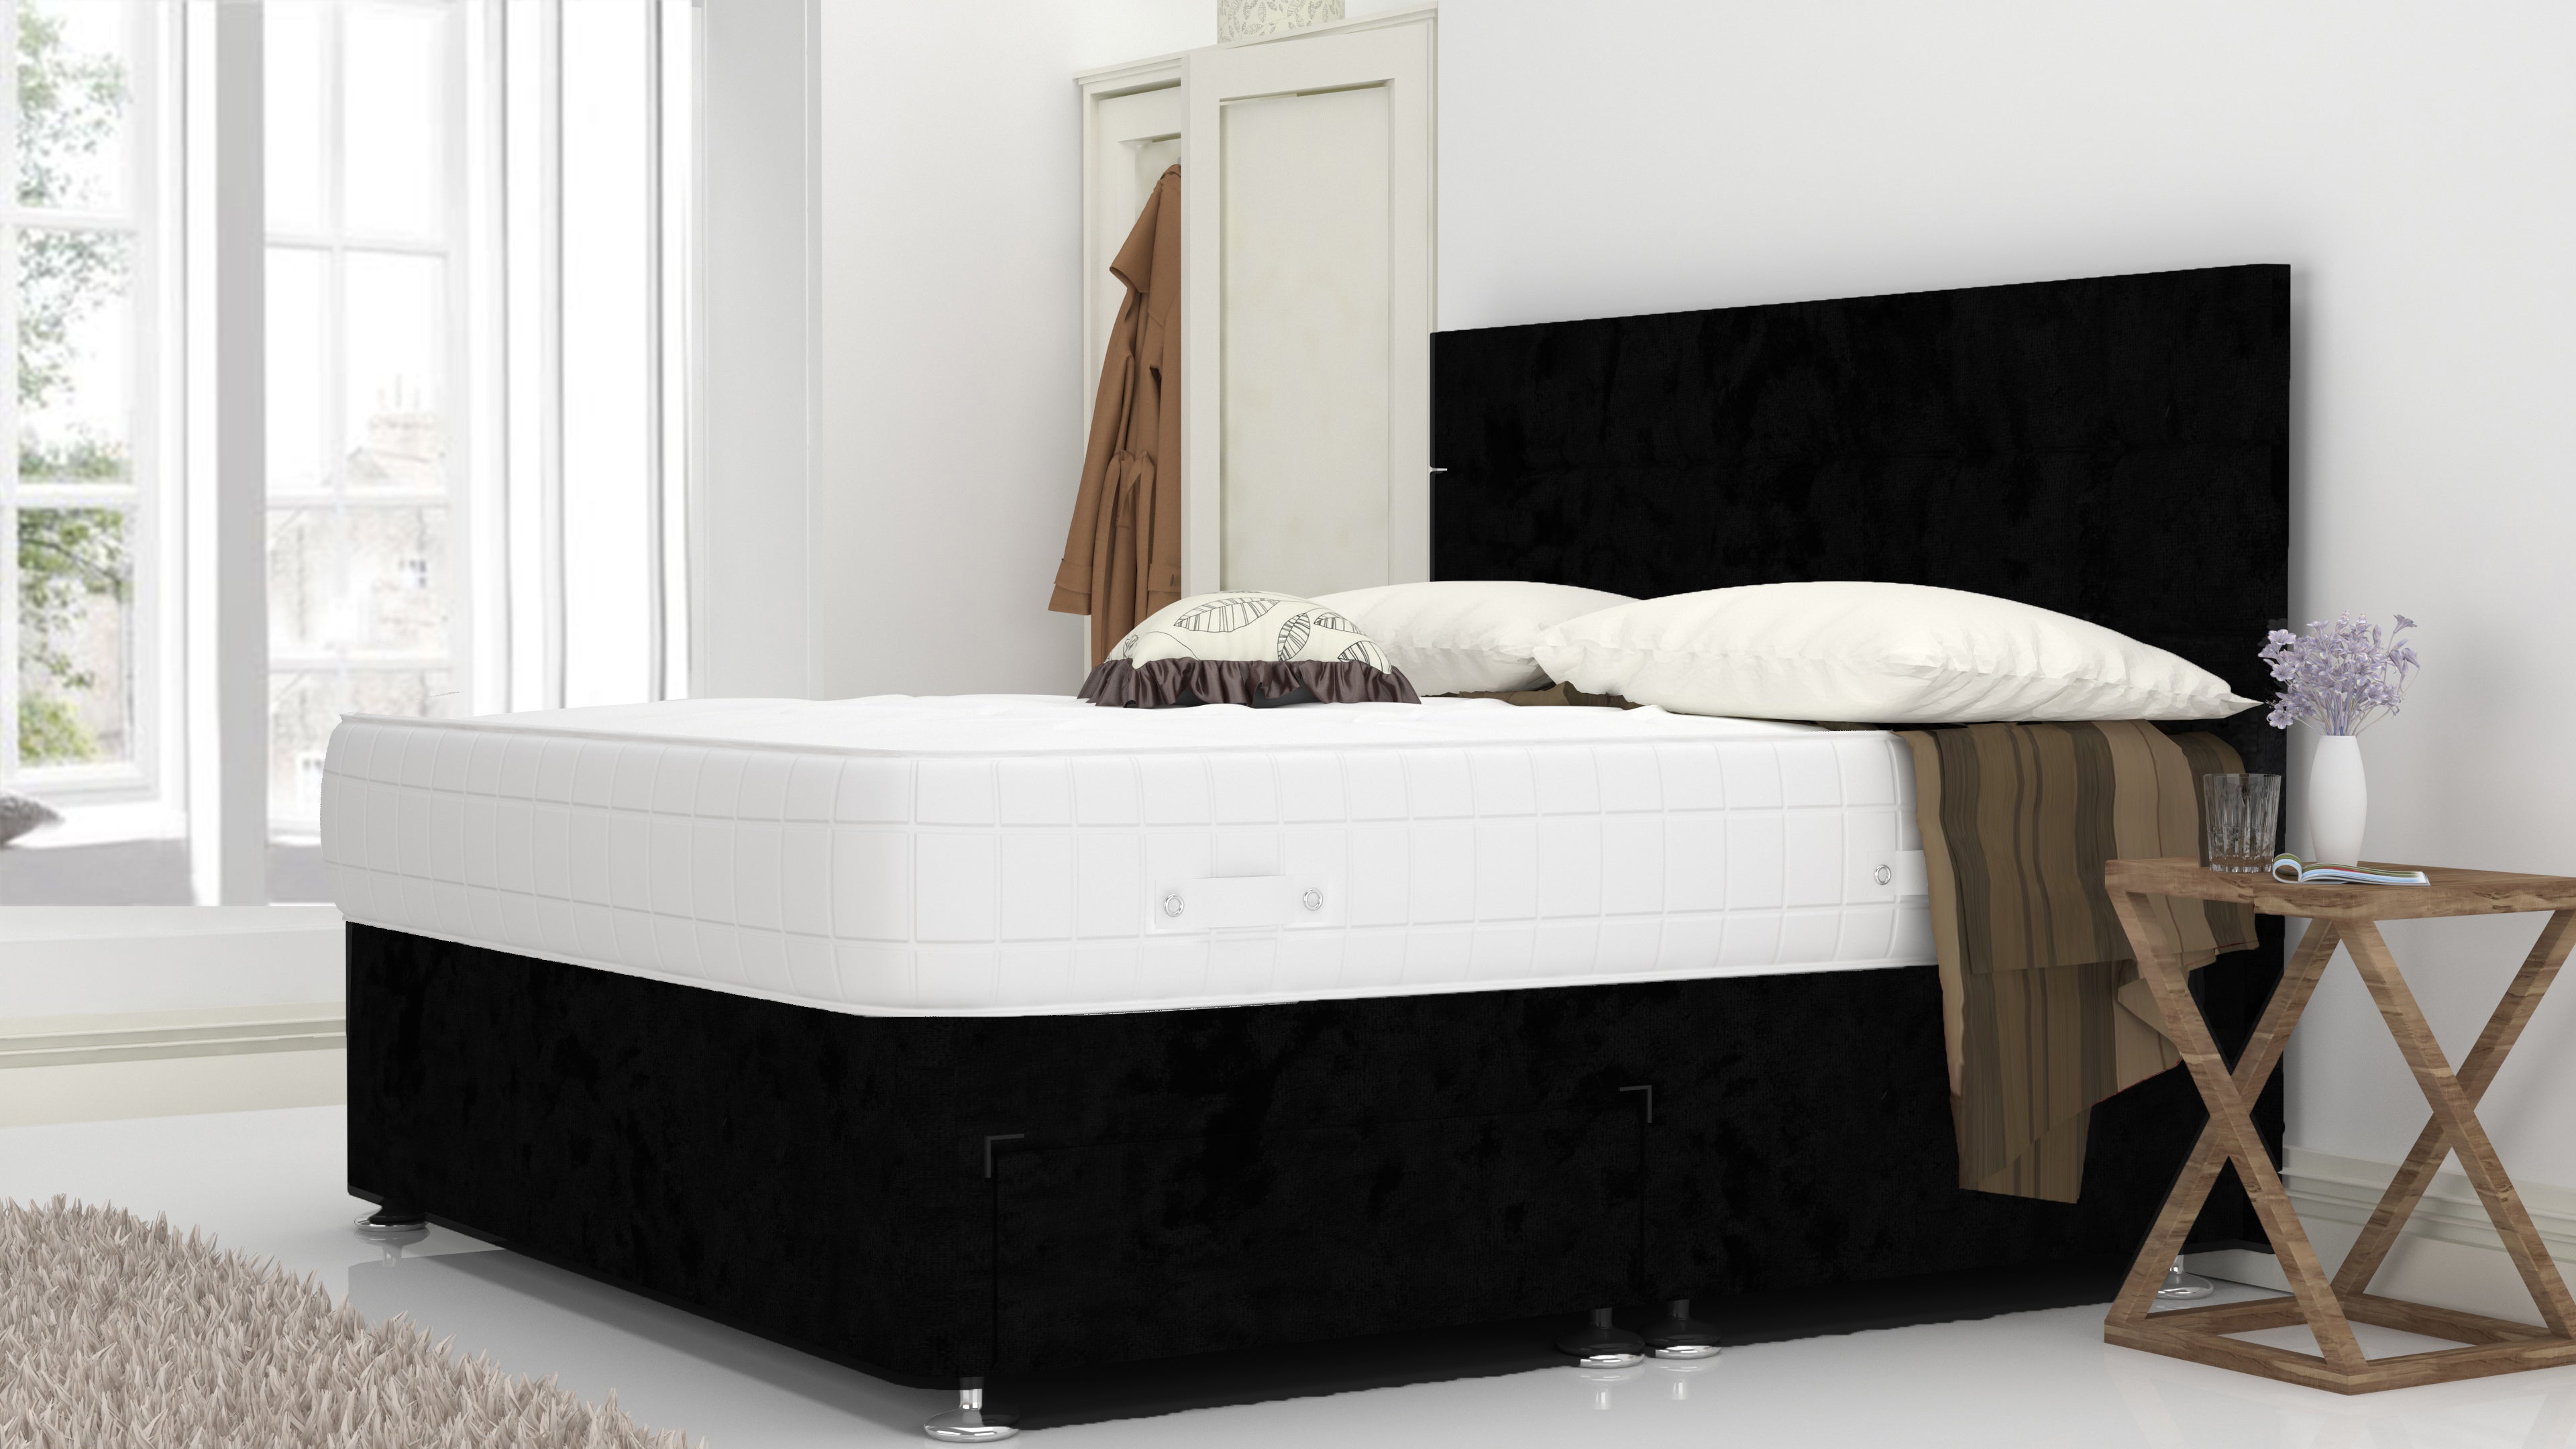 Black Crushed 4FT 6" Divan Bed Set With Cube Headboard (Included Feet) And Free Orthopedic Mattress